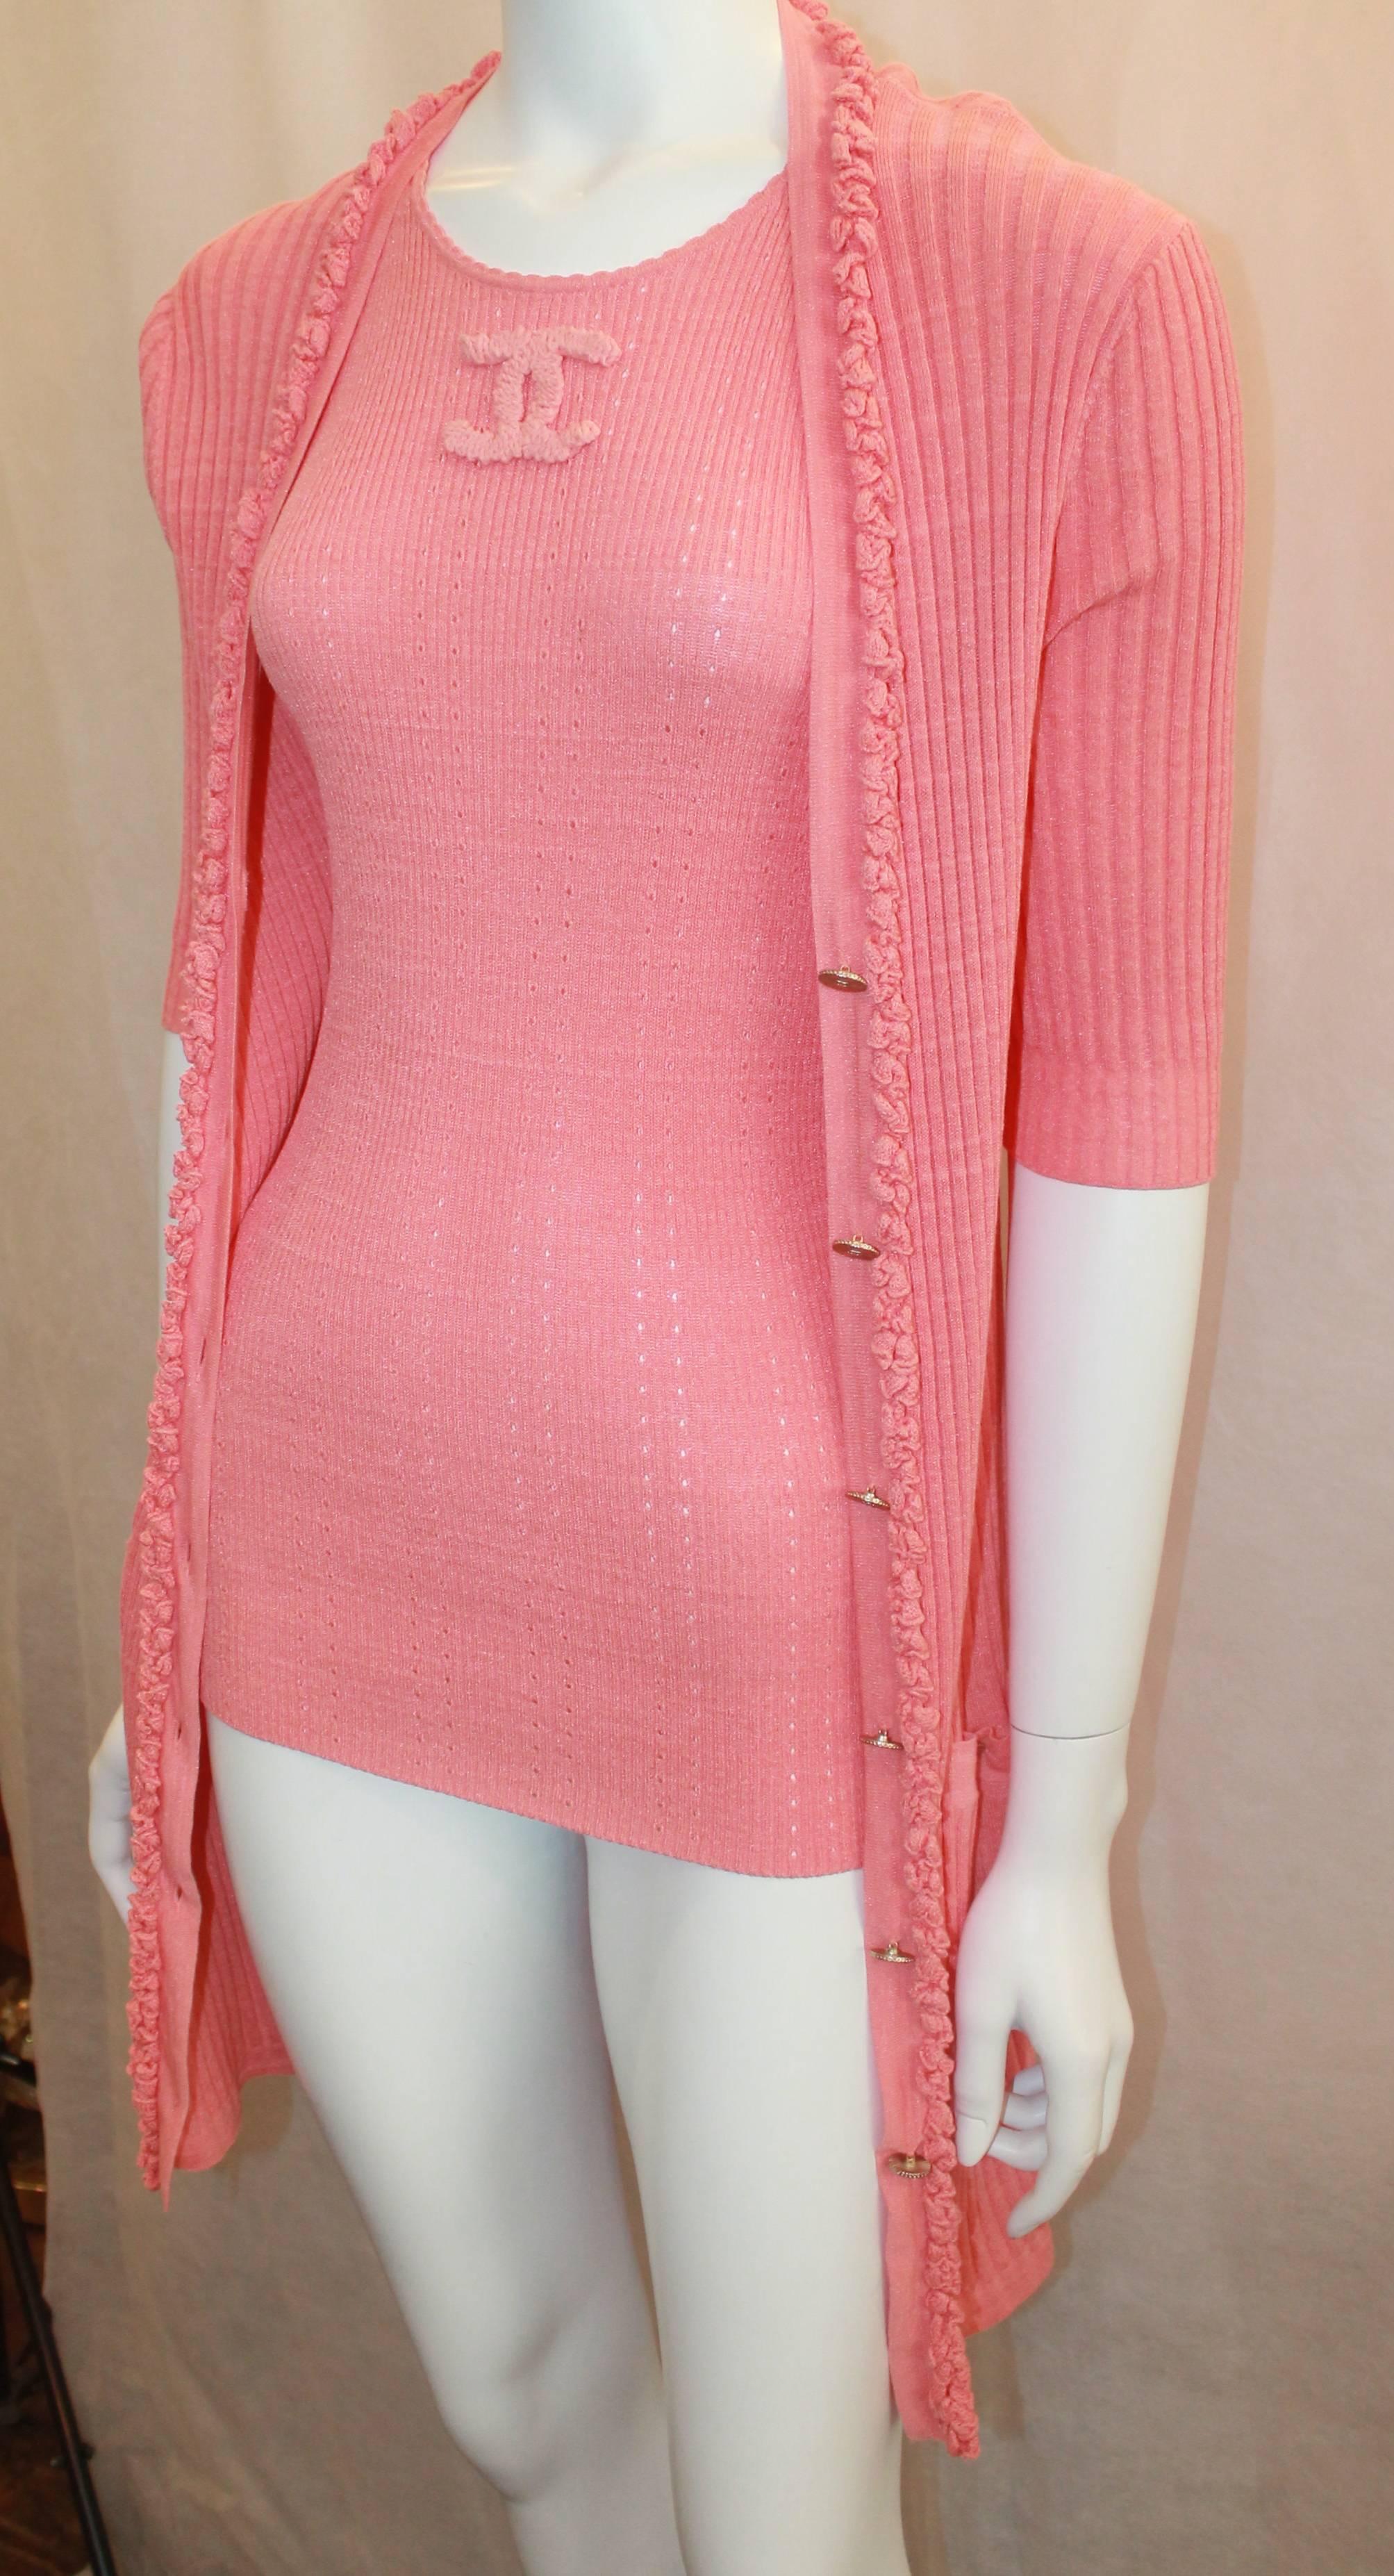 Chanel Coral Cotton Blend Knitted Sweater Set - 42 - 09P. This Chanel, knitted, cotton-nylon blend, sweater set is great for the summer. The sweater set is composed of a sleeveless knitted tank with a ruffled 